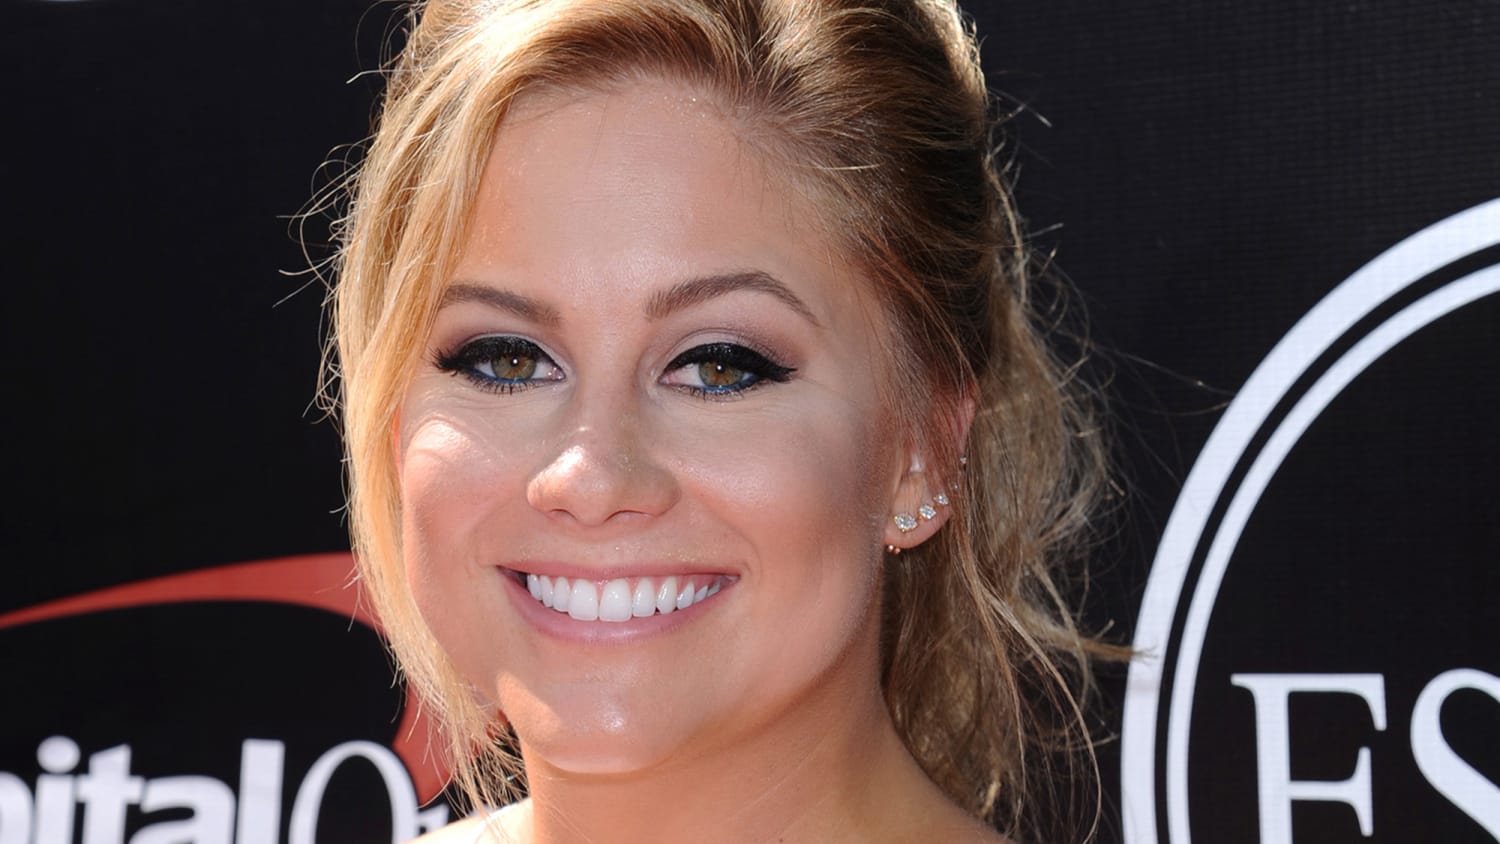 Olympic gymnast Shawn Johnson dishes on upcoming wedding with Andrew East.